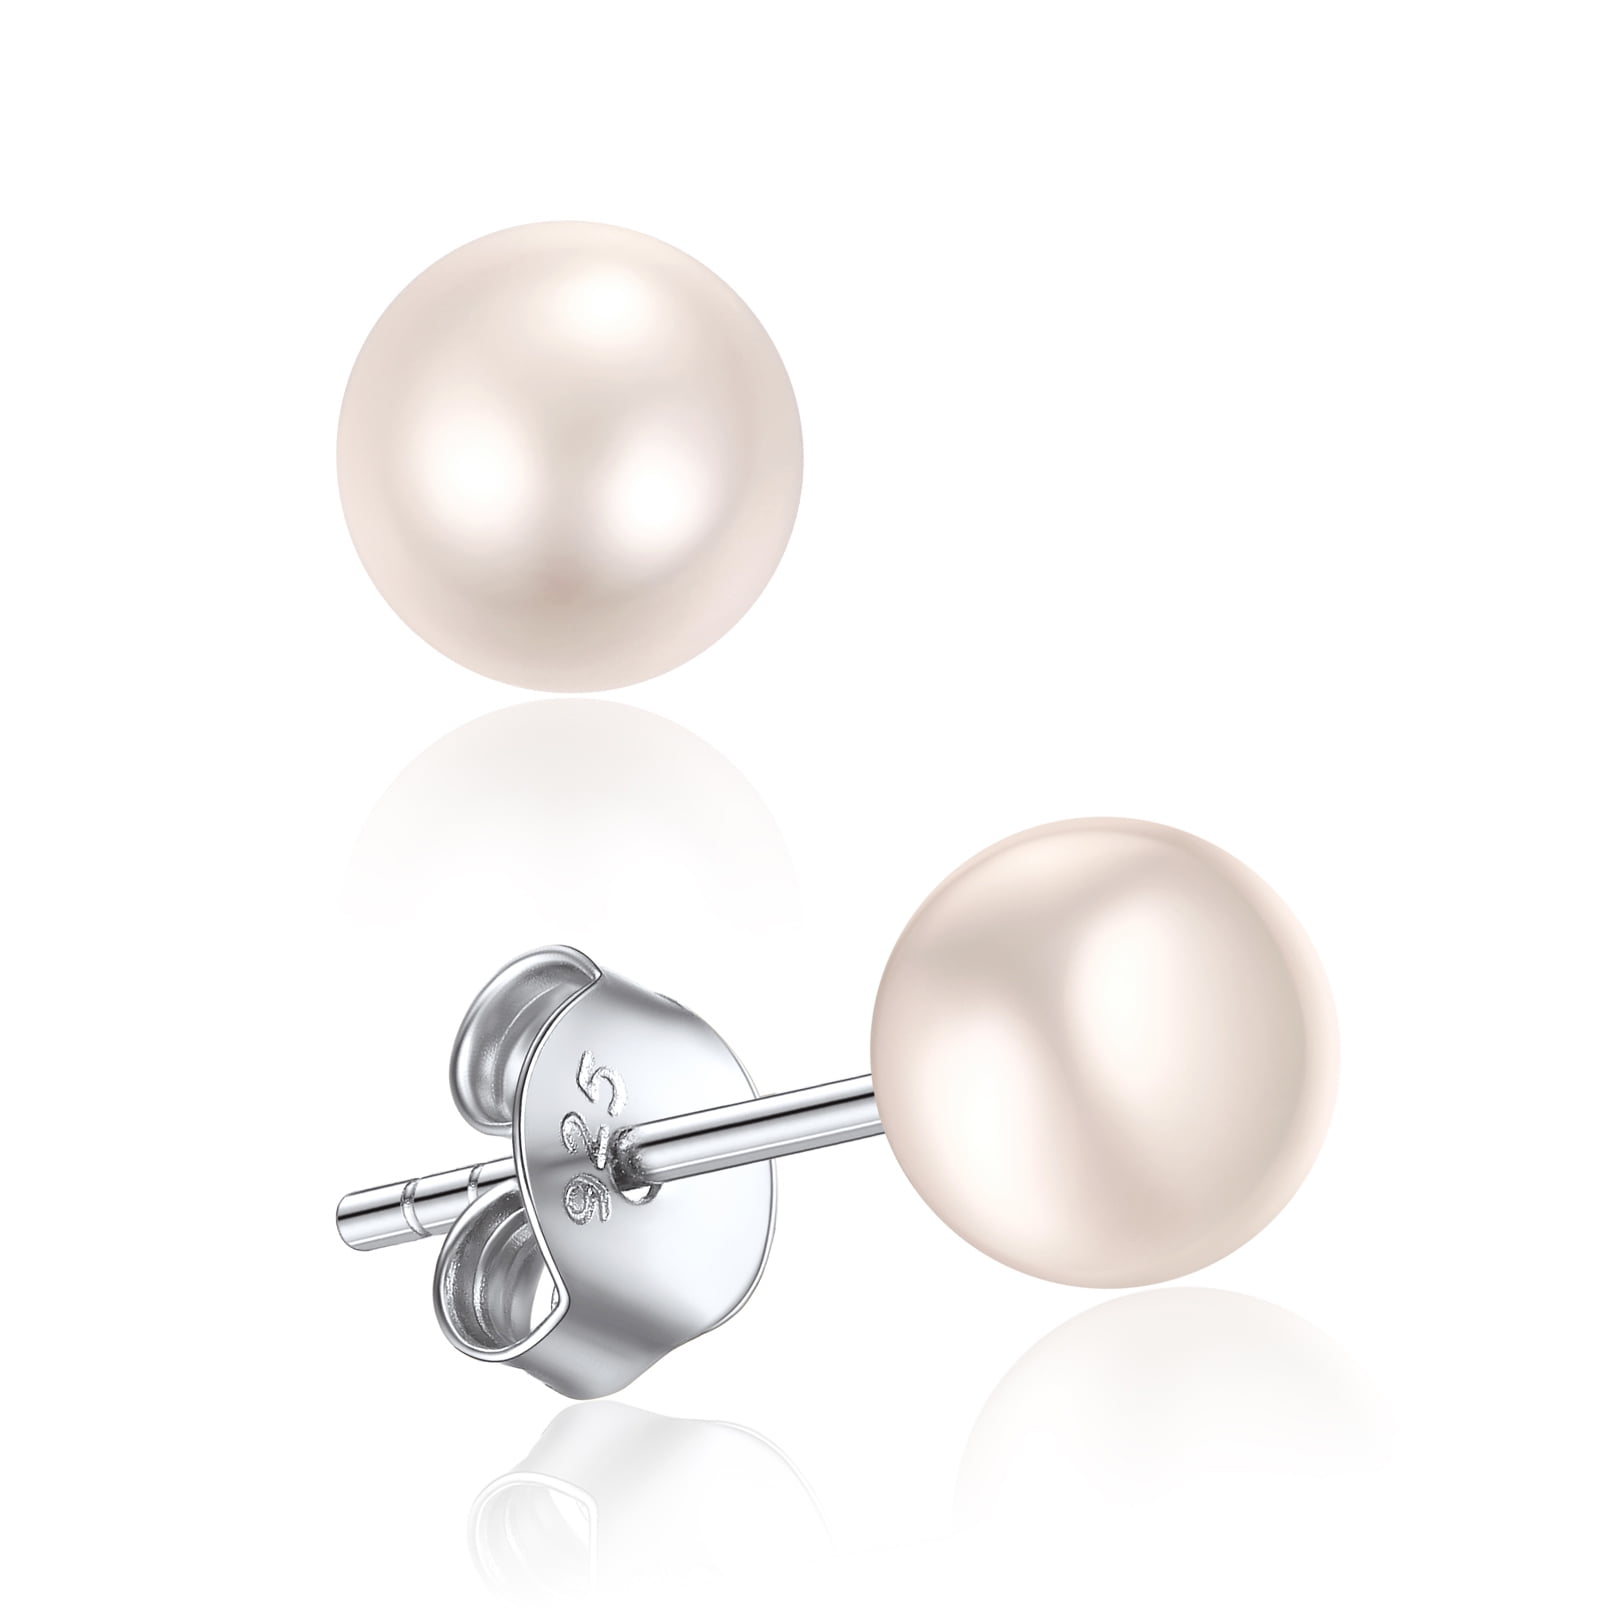 ChicSilver Pearl Earrings for Women 6mm Freshwater Cultured White ...